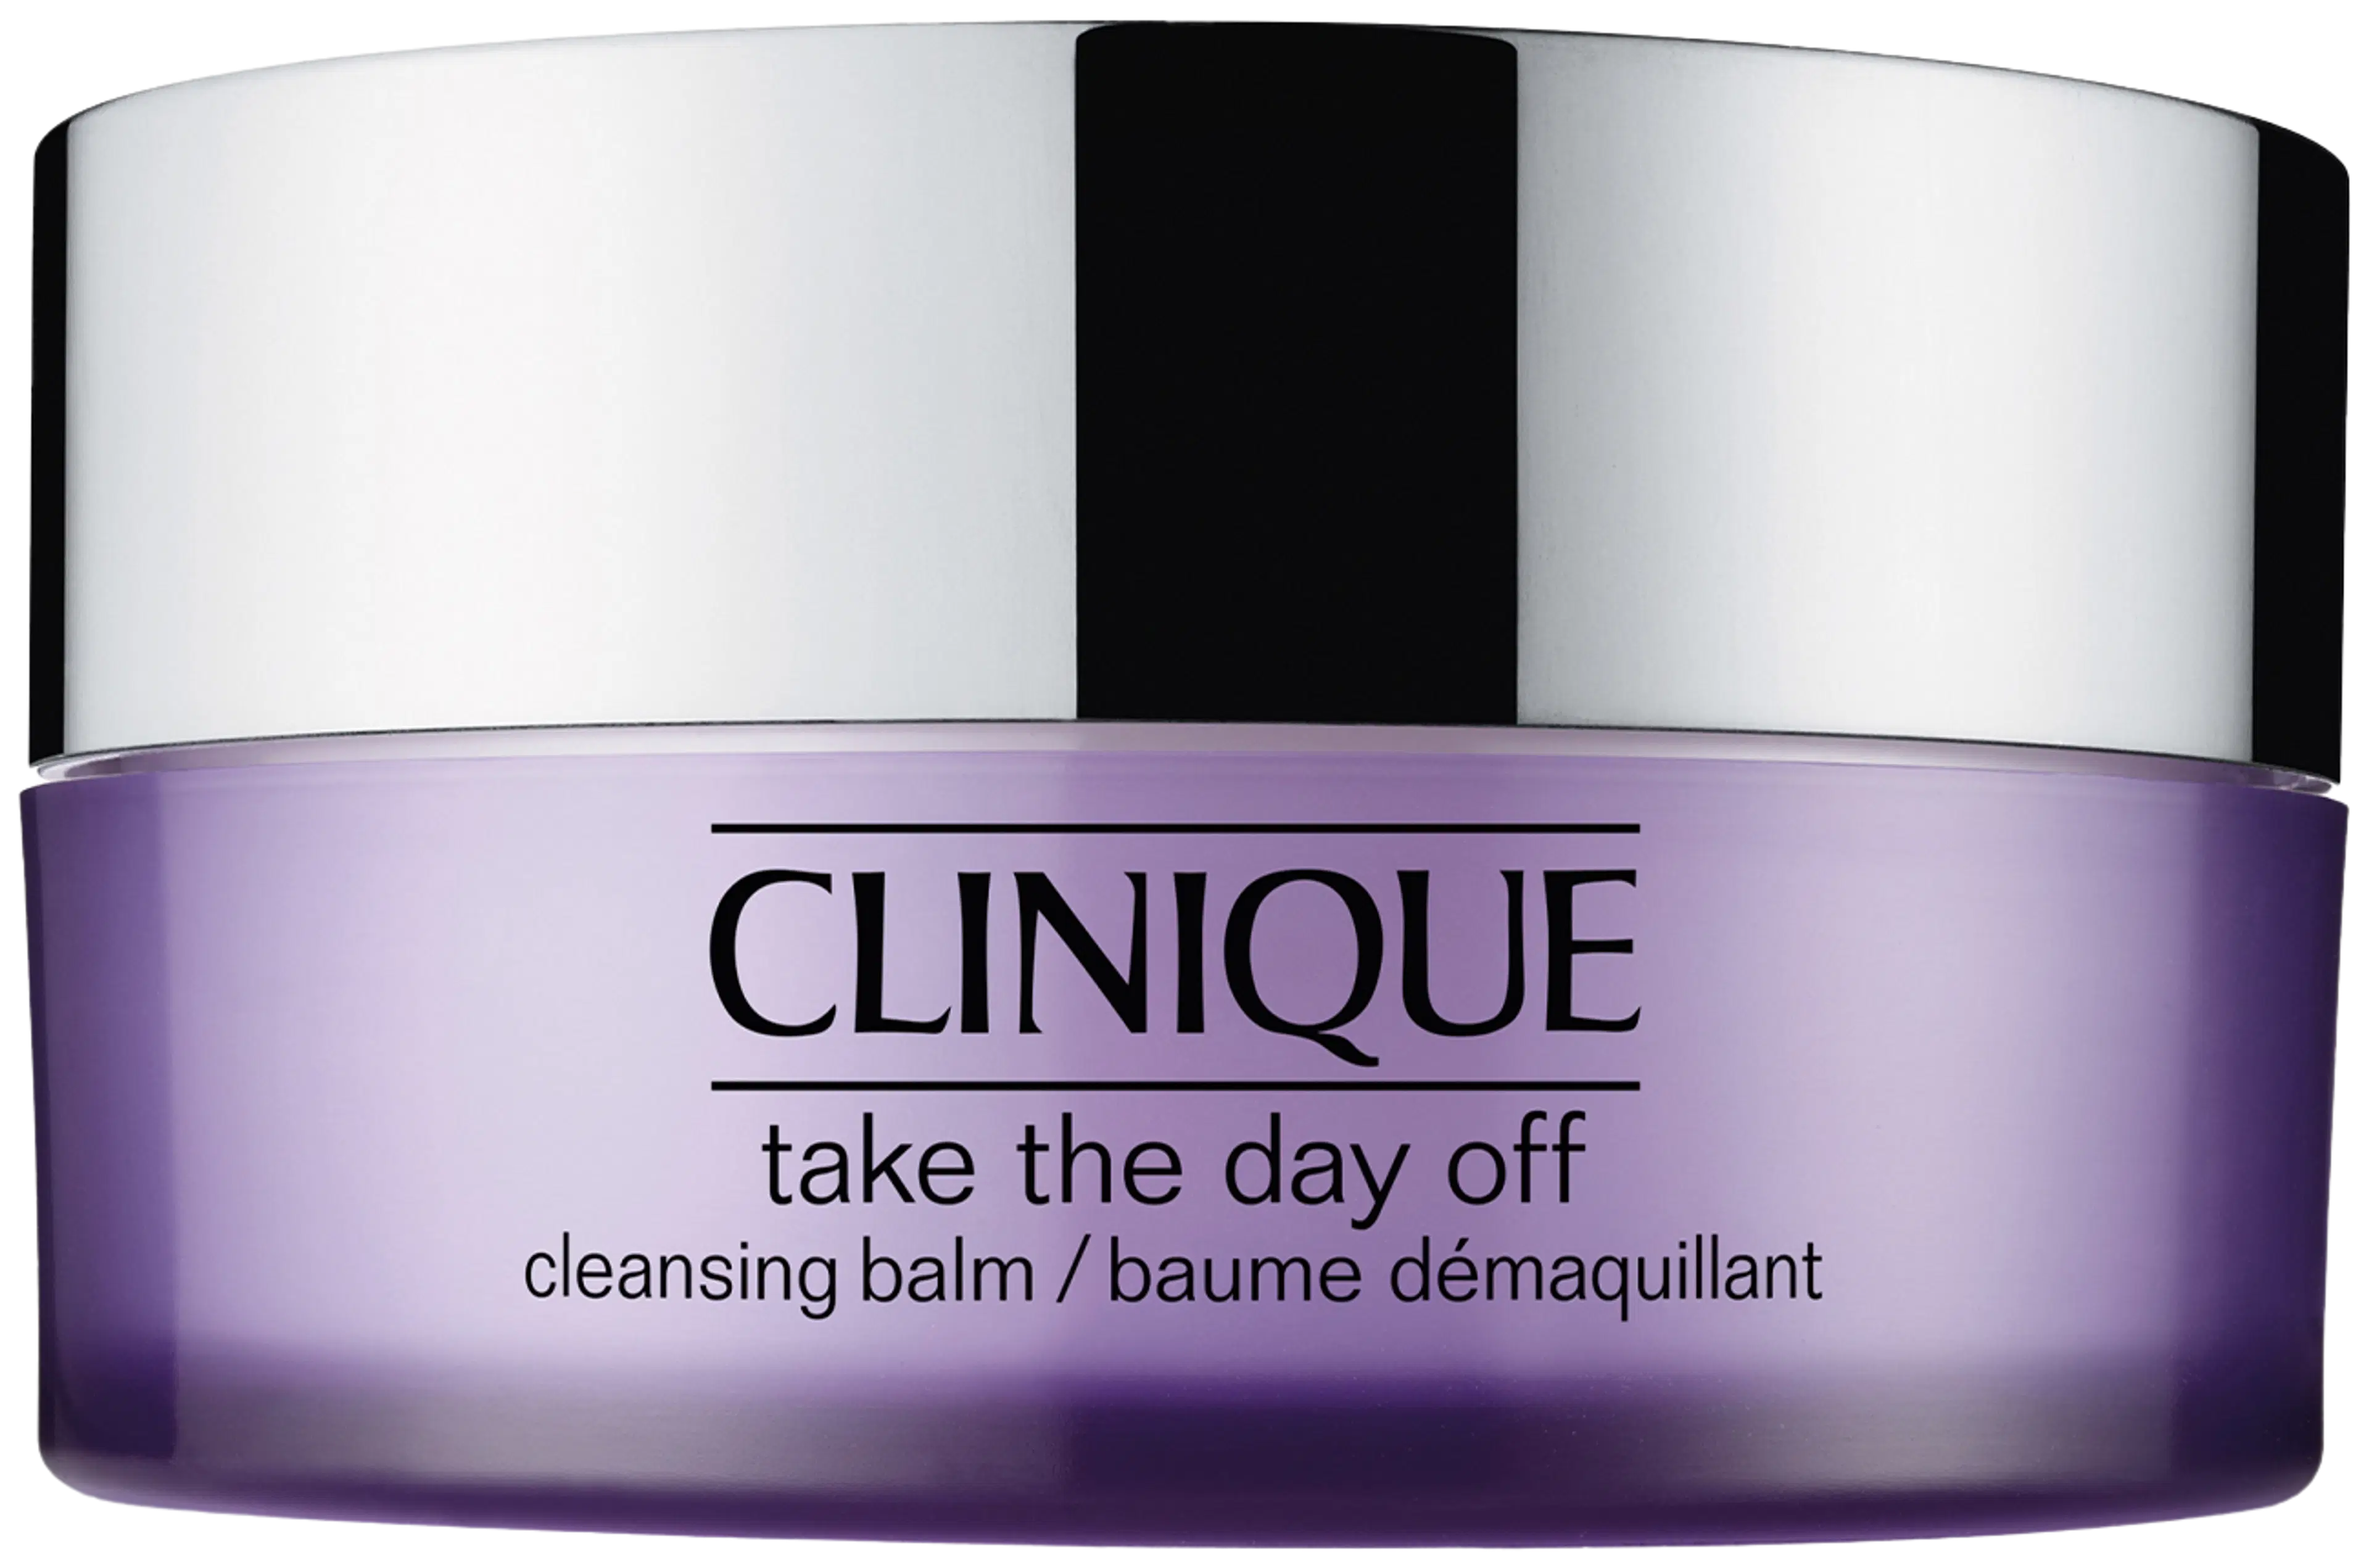 Clinique Take The Day Off Cleansing Balm puhdistusvoide 125 ml